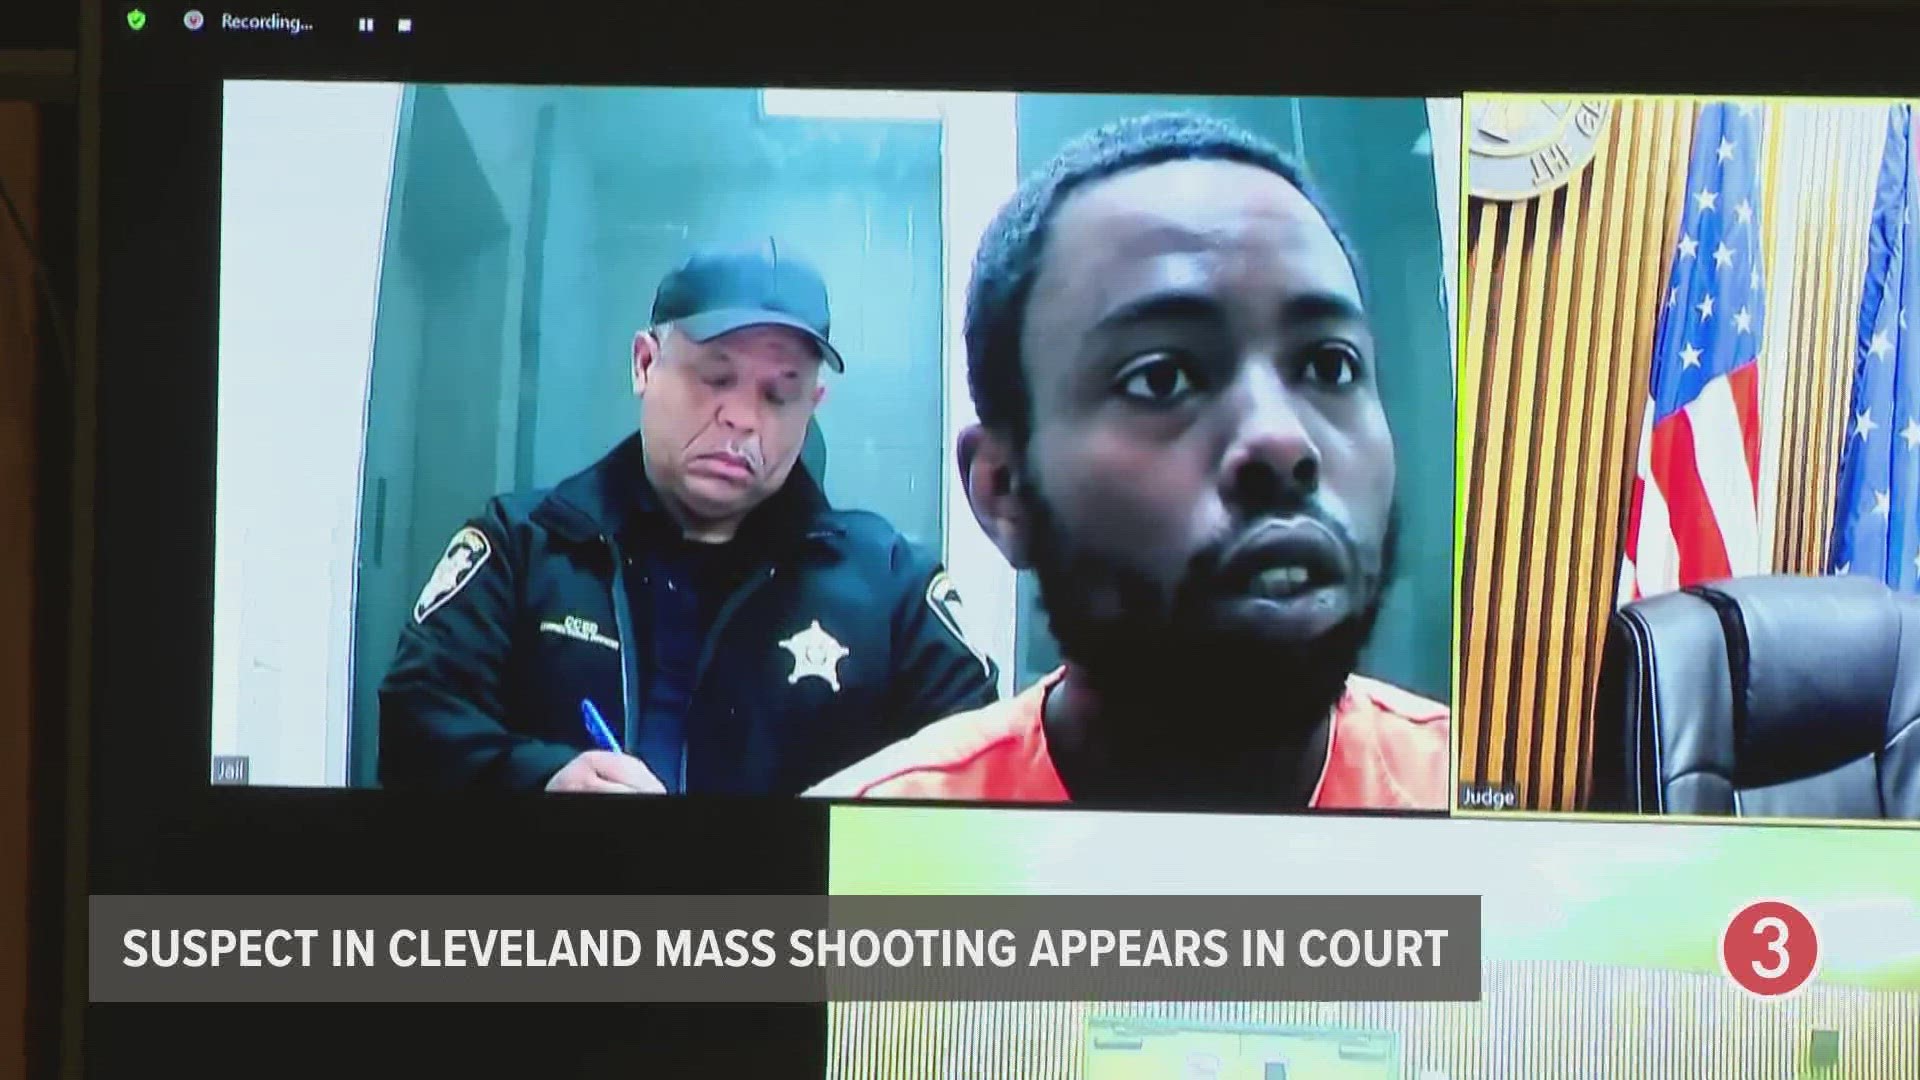 The man accused of shooting nine individuals in Cleveland's Warehouse District is being held on a $9 million bond.